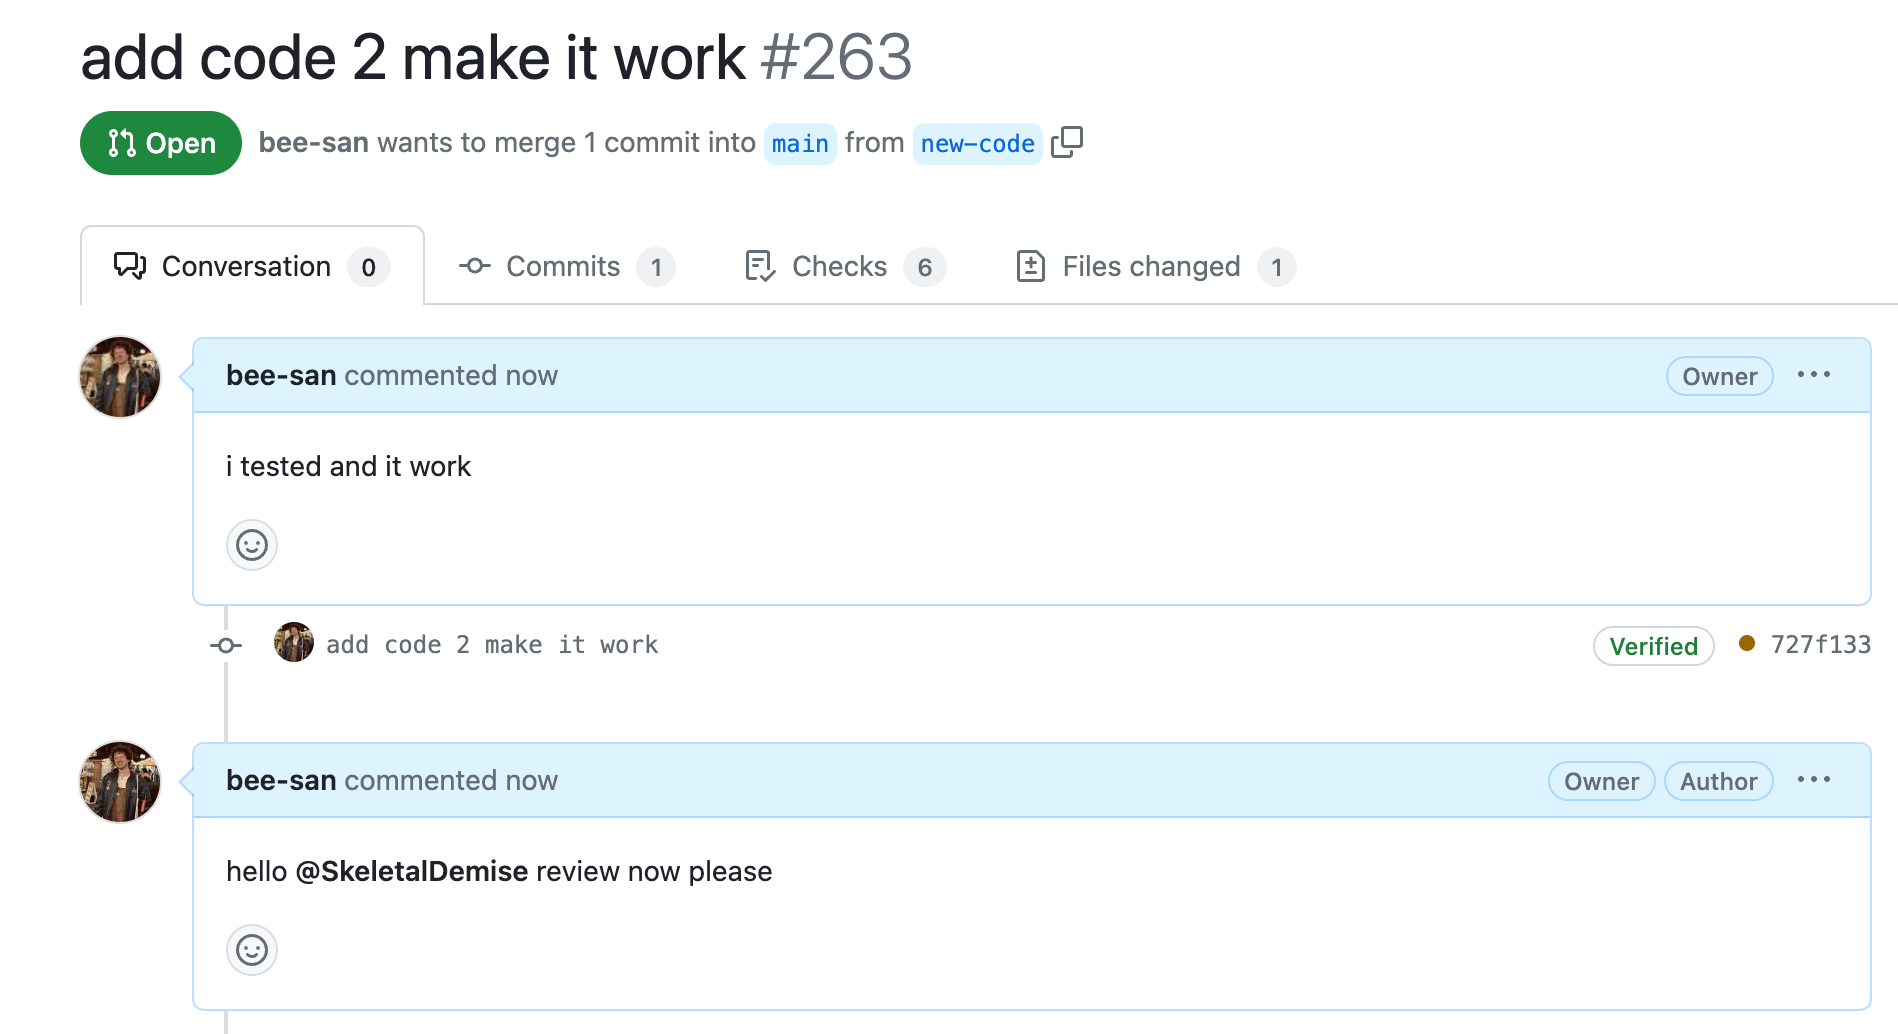 Sample pull request with title "add code 2 make it work" and a comment that tags a team mate and asks them to review it right now